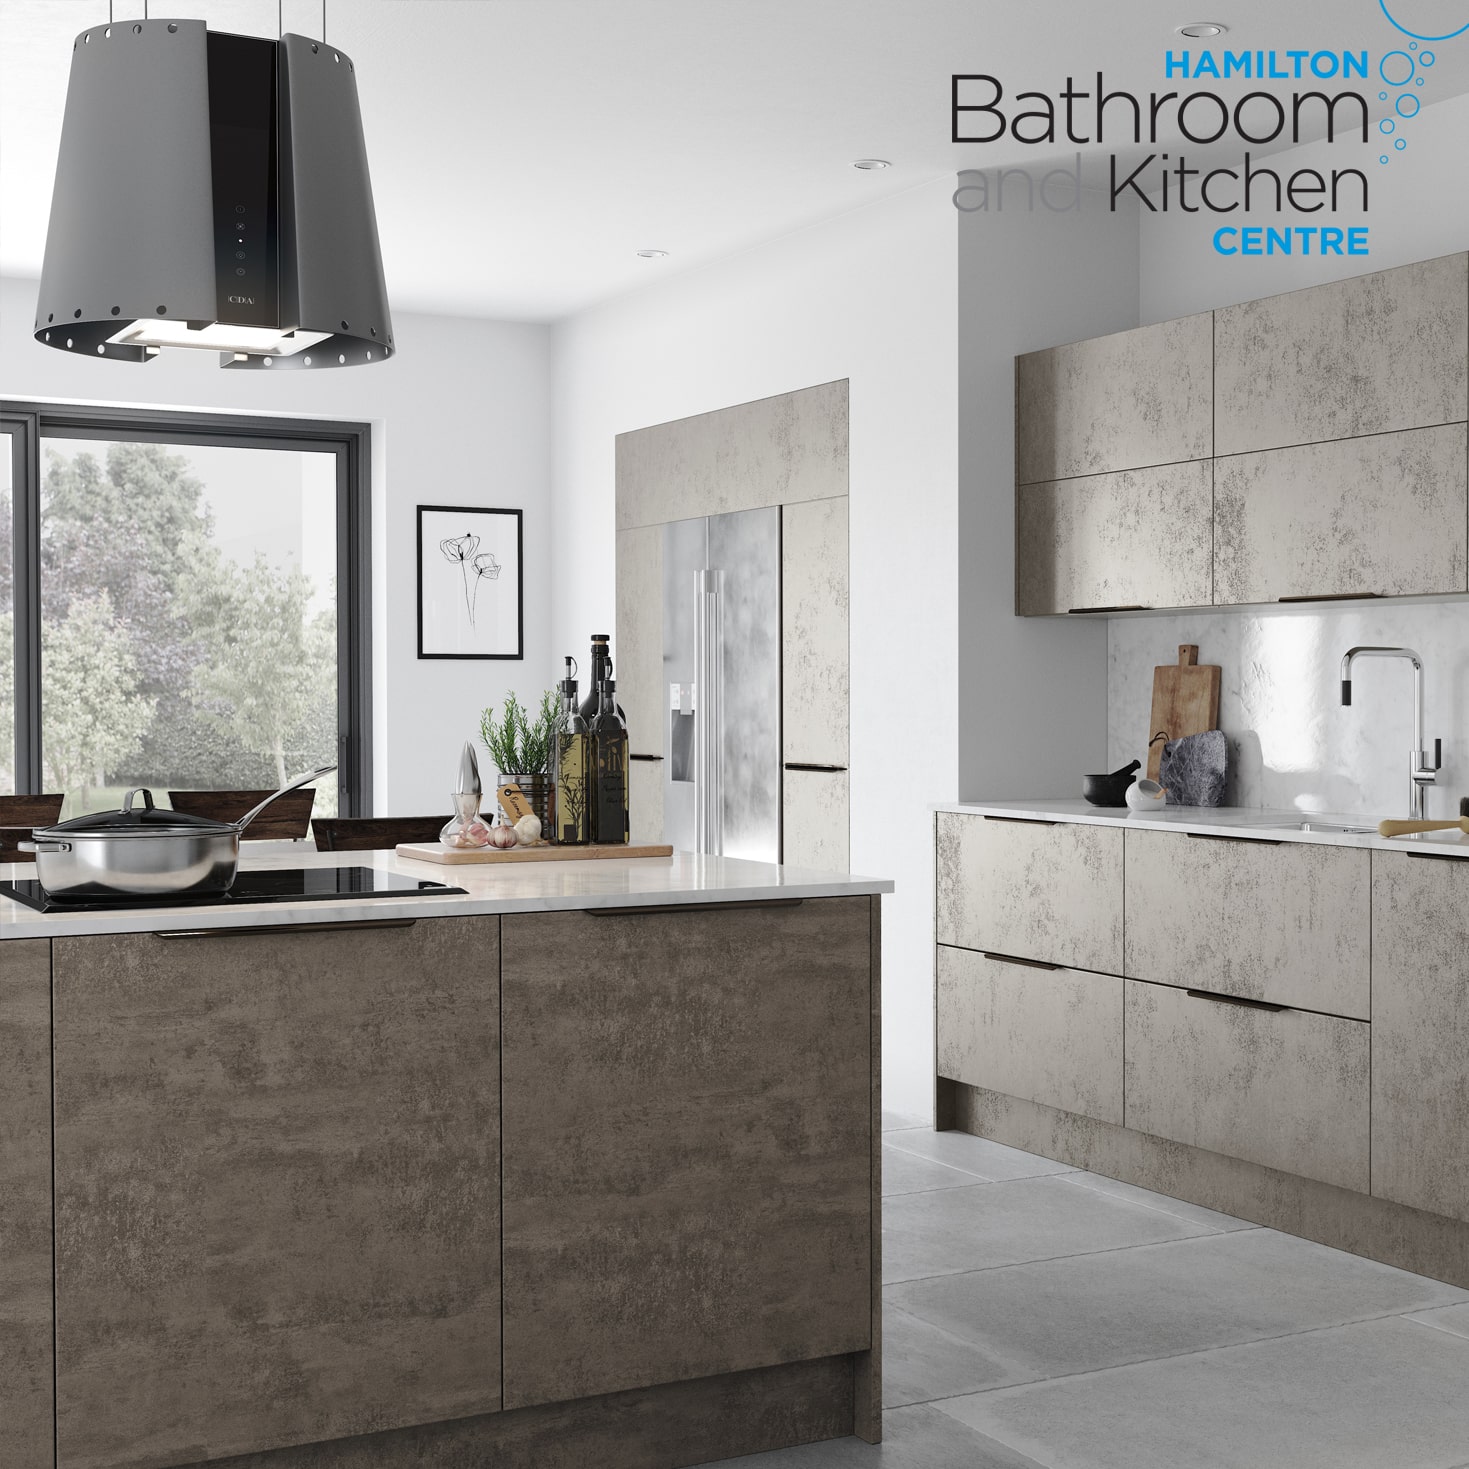 No.1 choice for kitchens and bathrooms in Lanarkshire